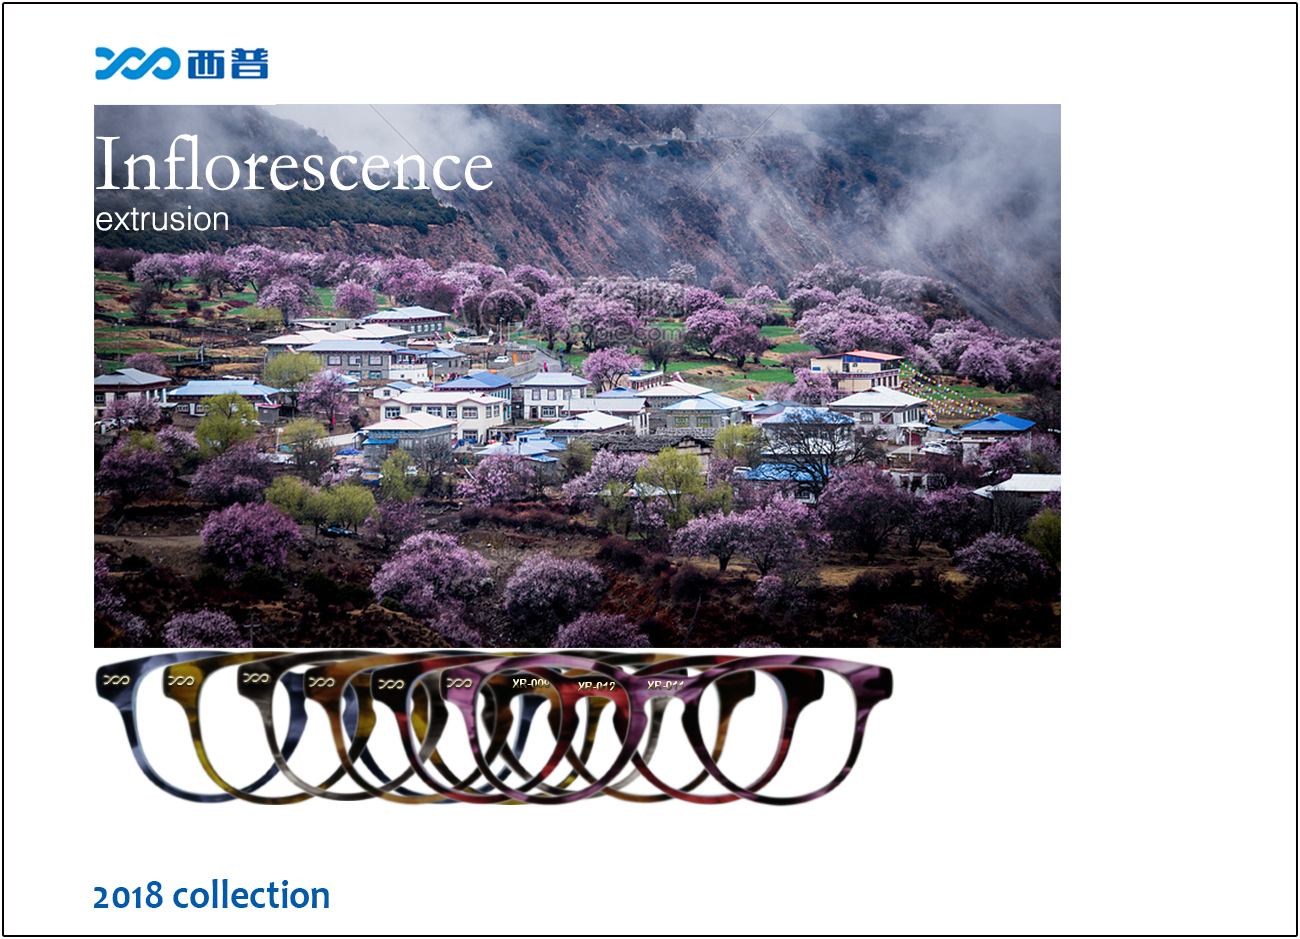 2018 collection of Inflorescence